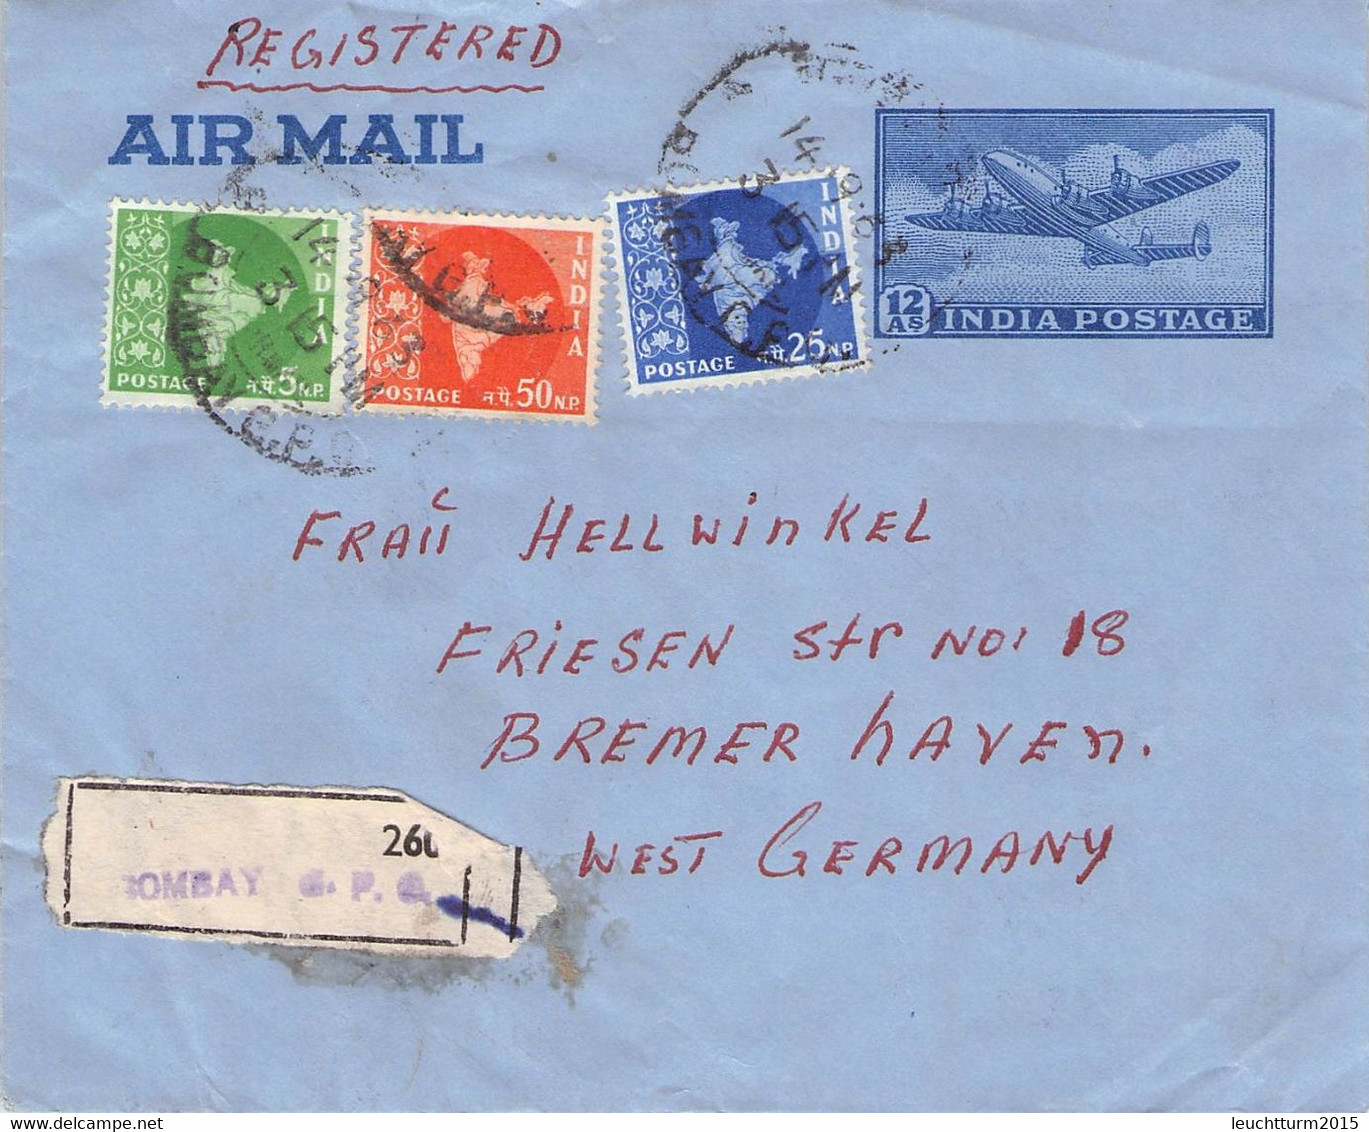 INDIA - AIRMAIL 1963 BOMBAY > BREMERHAVEN/GEERMANY /G114 - Luftpost